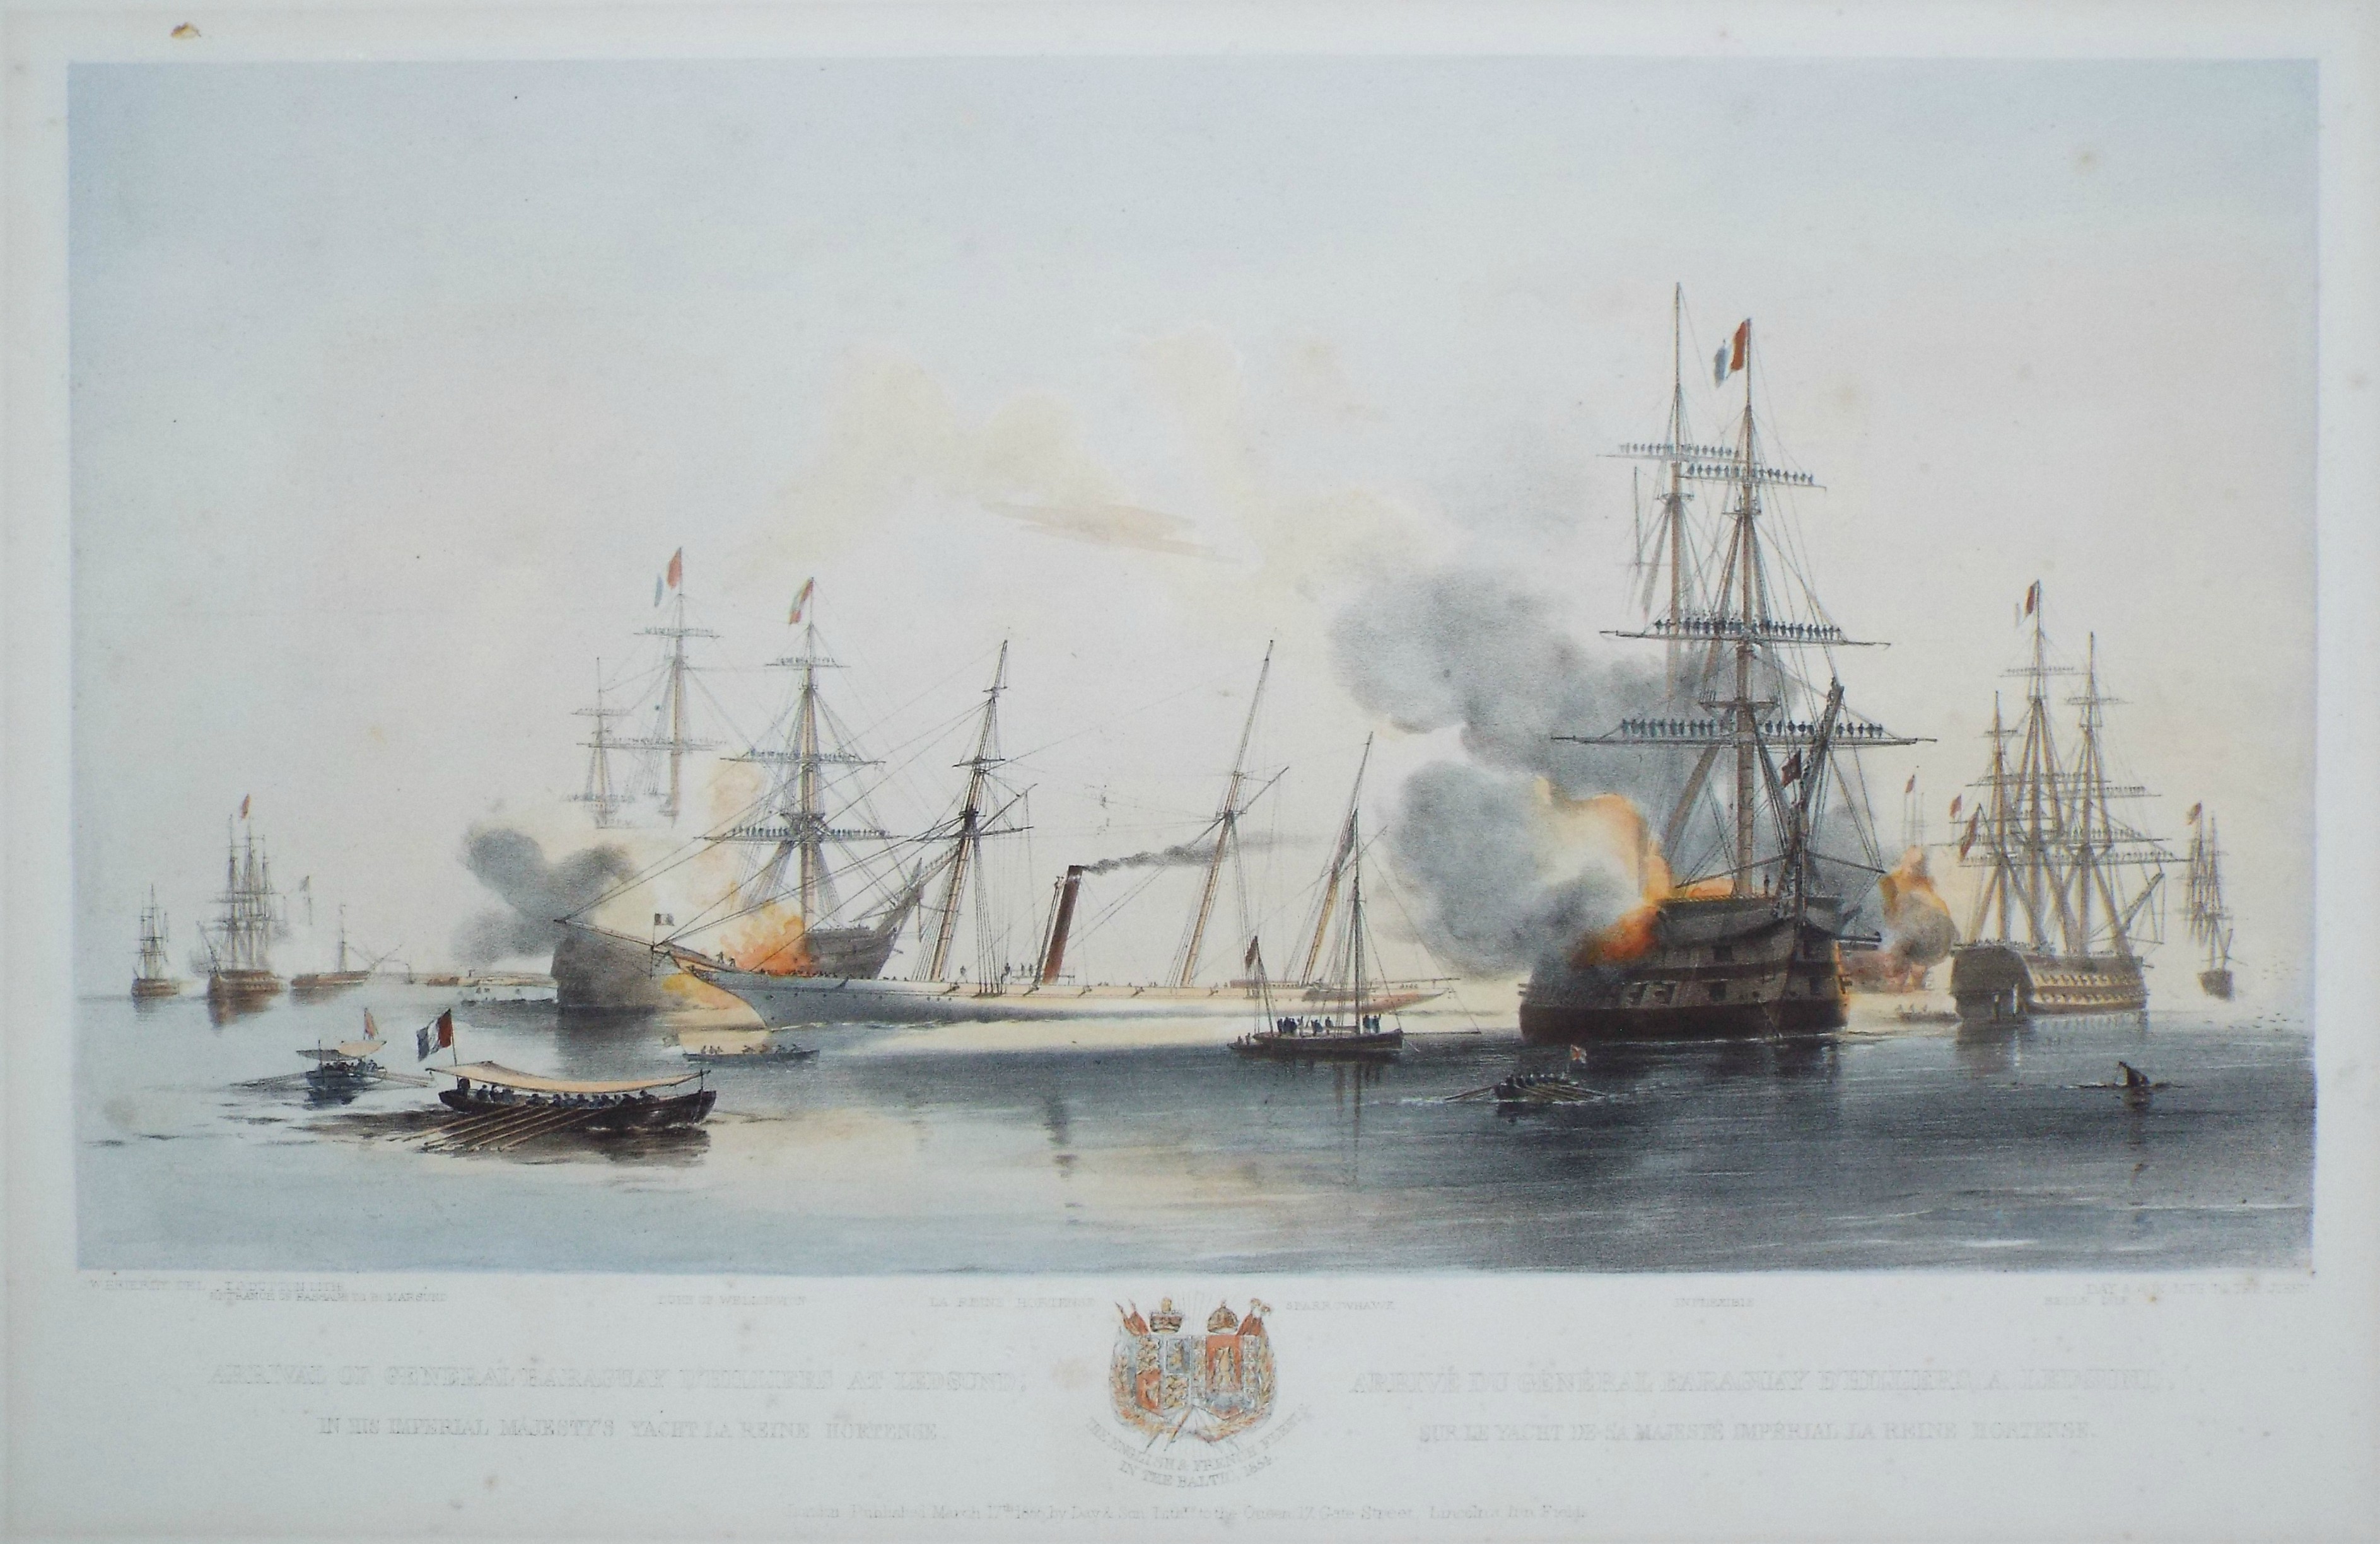 Lithograph - Arrival of General Baraguay d'Hilliers at Ledsund, in his Majesty's Yacht la Reine Hortense. - Dutton